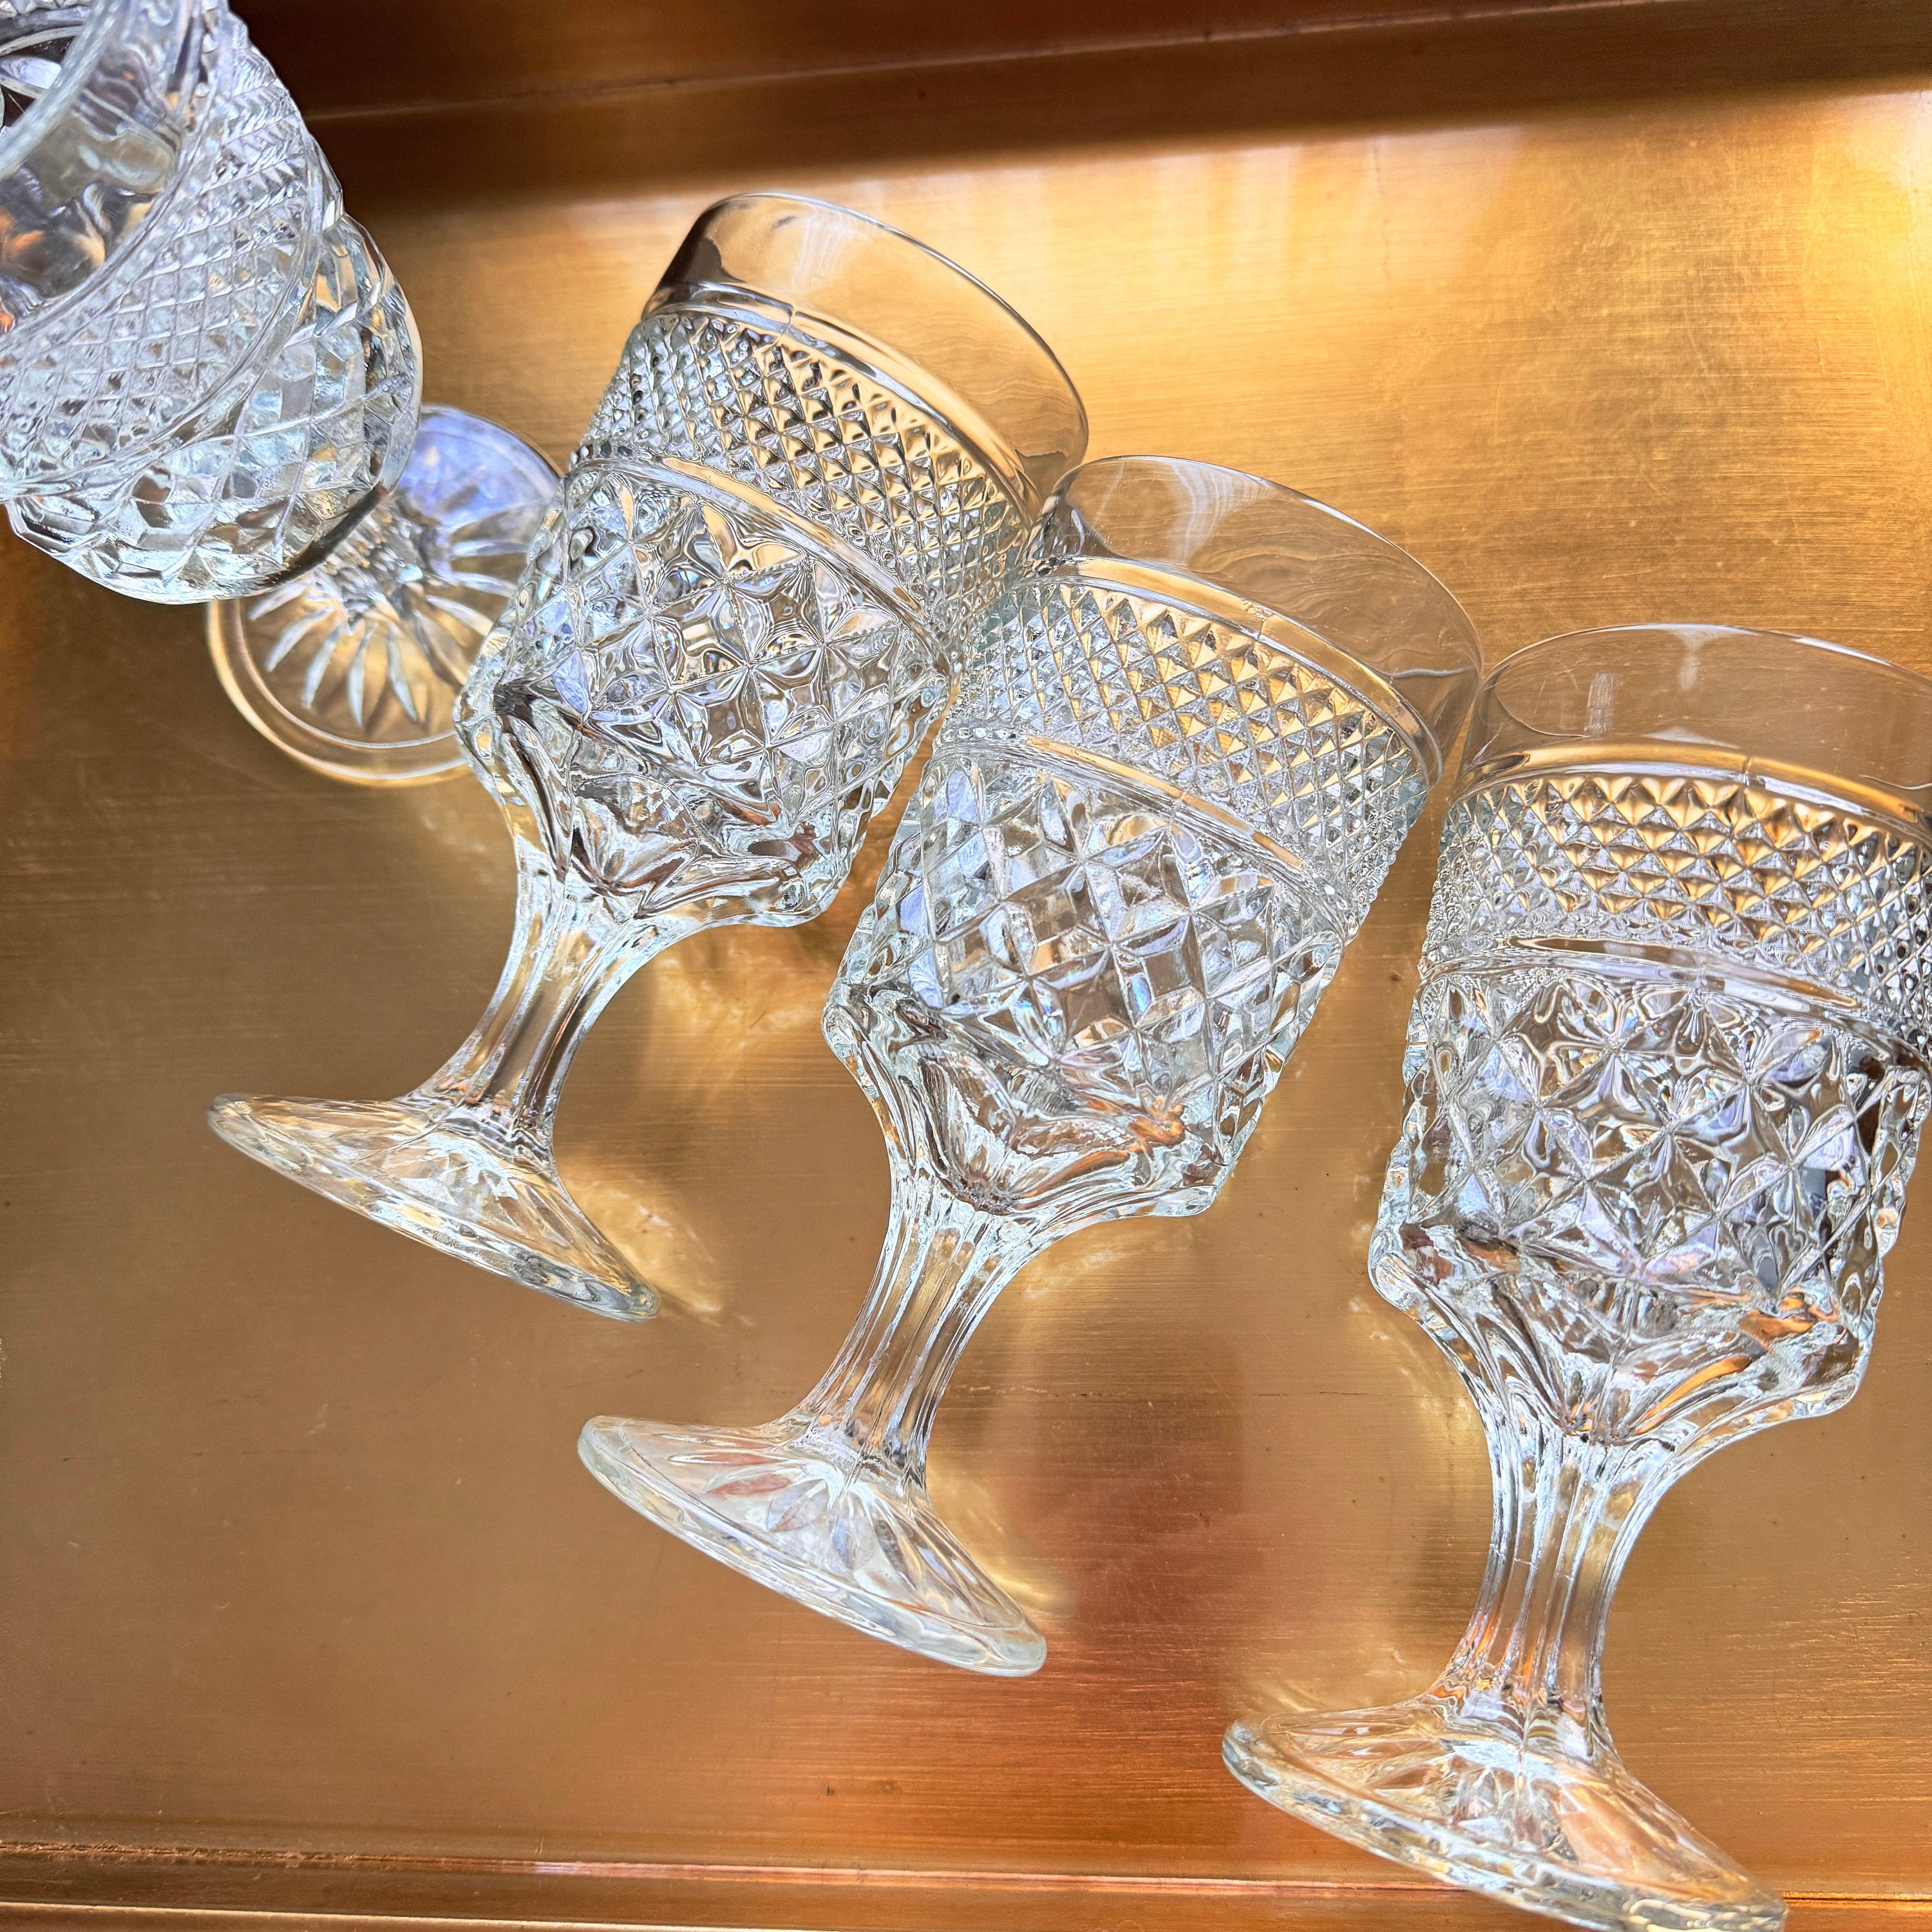 7 x vintage goblet chalice hammered metal wine glasses cups cup lot India  mfg.